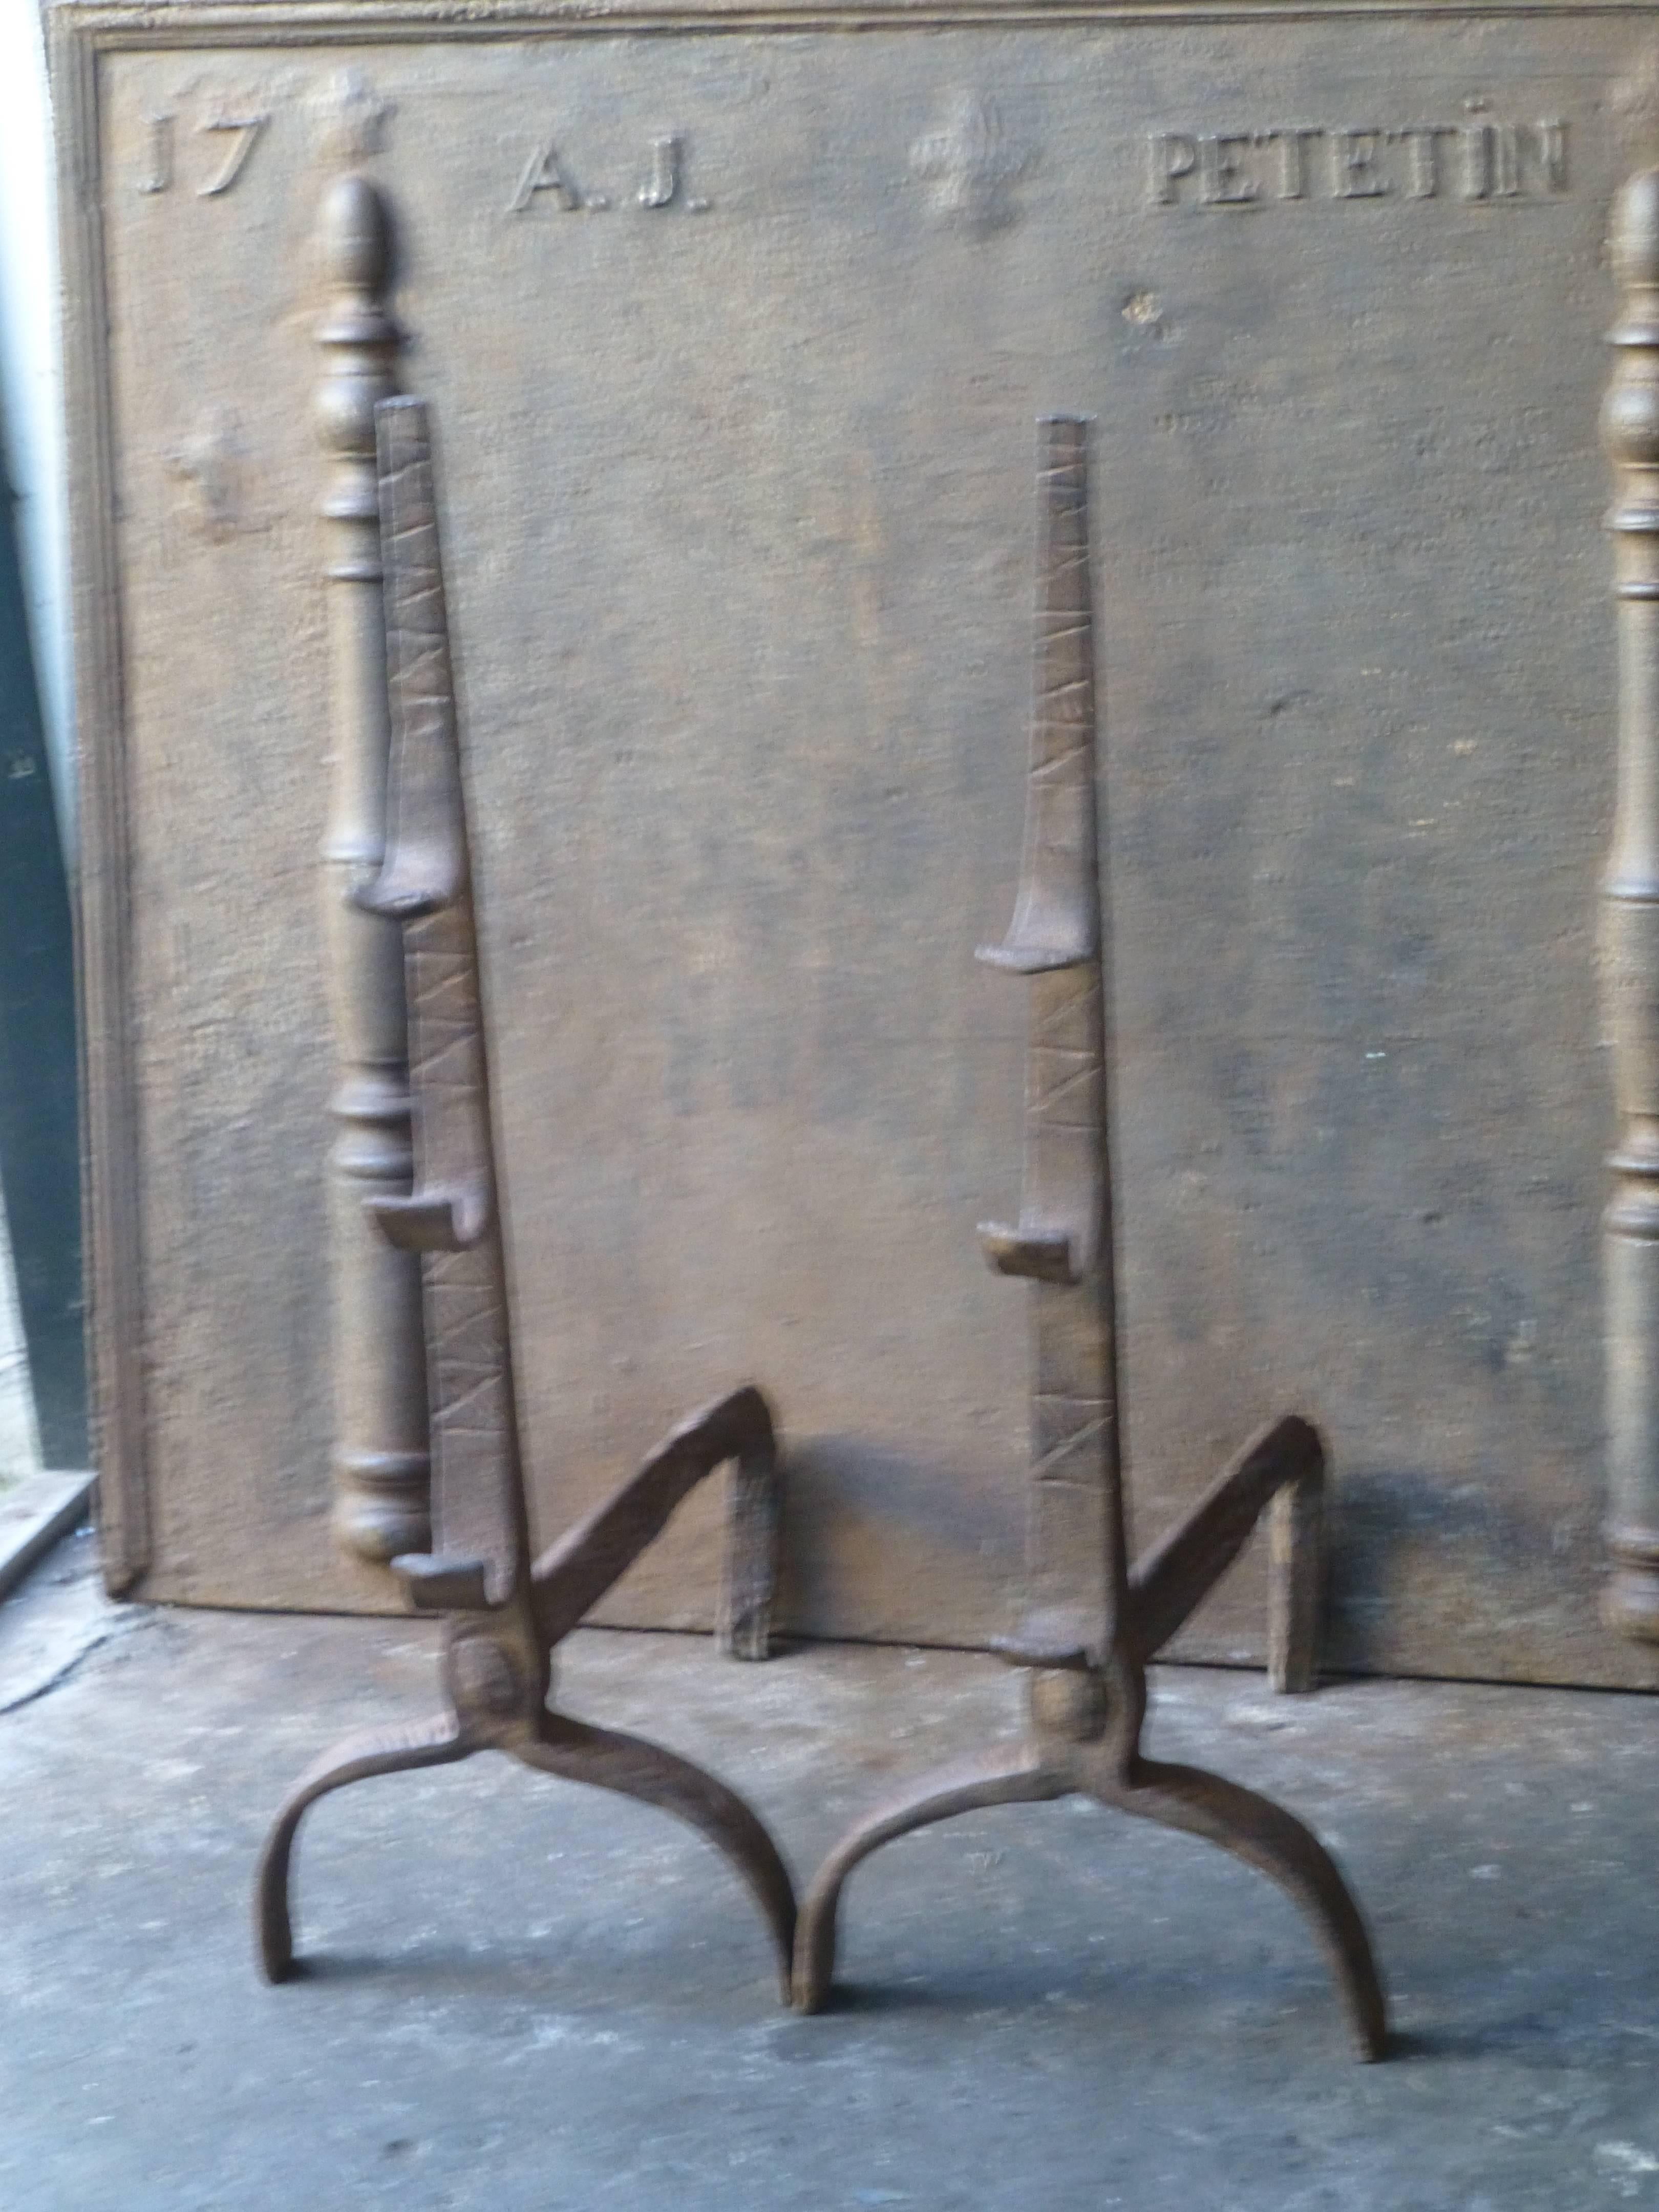 17th century French Gothic fire dogs with spit hooks. Made of wrought iron. These French andirons are called 'landiers' in France. This dates from the times the andirons were the main cooking equipment in the house. They had spit hooks to grill meat